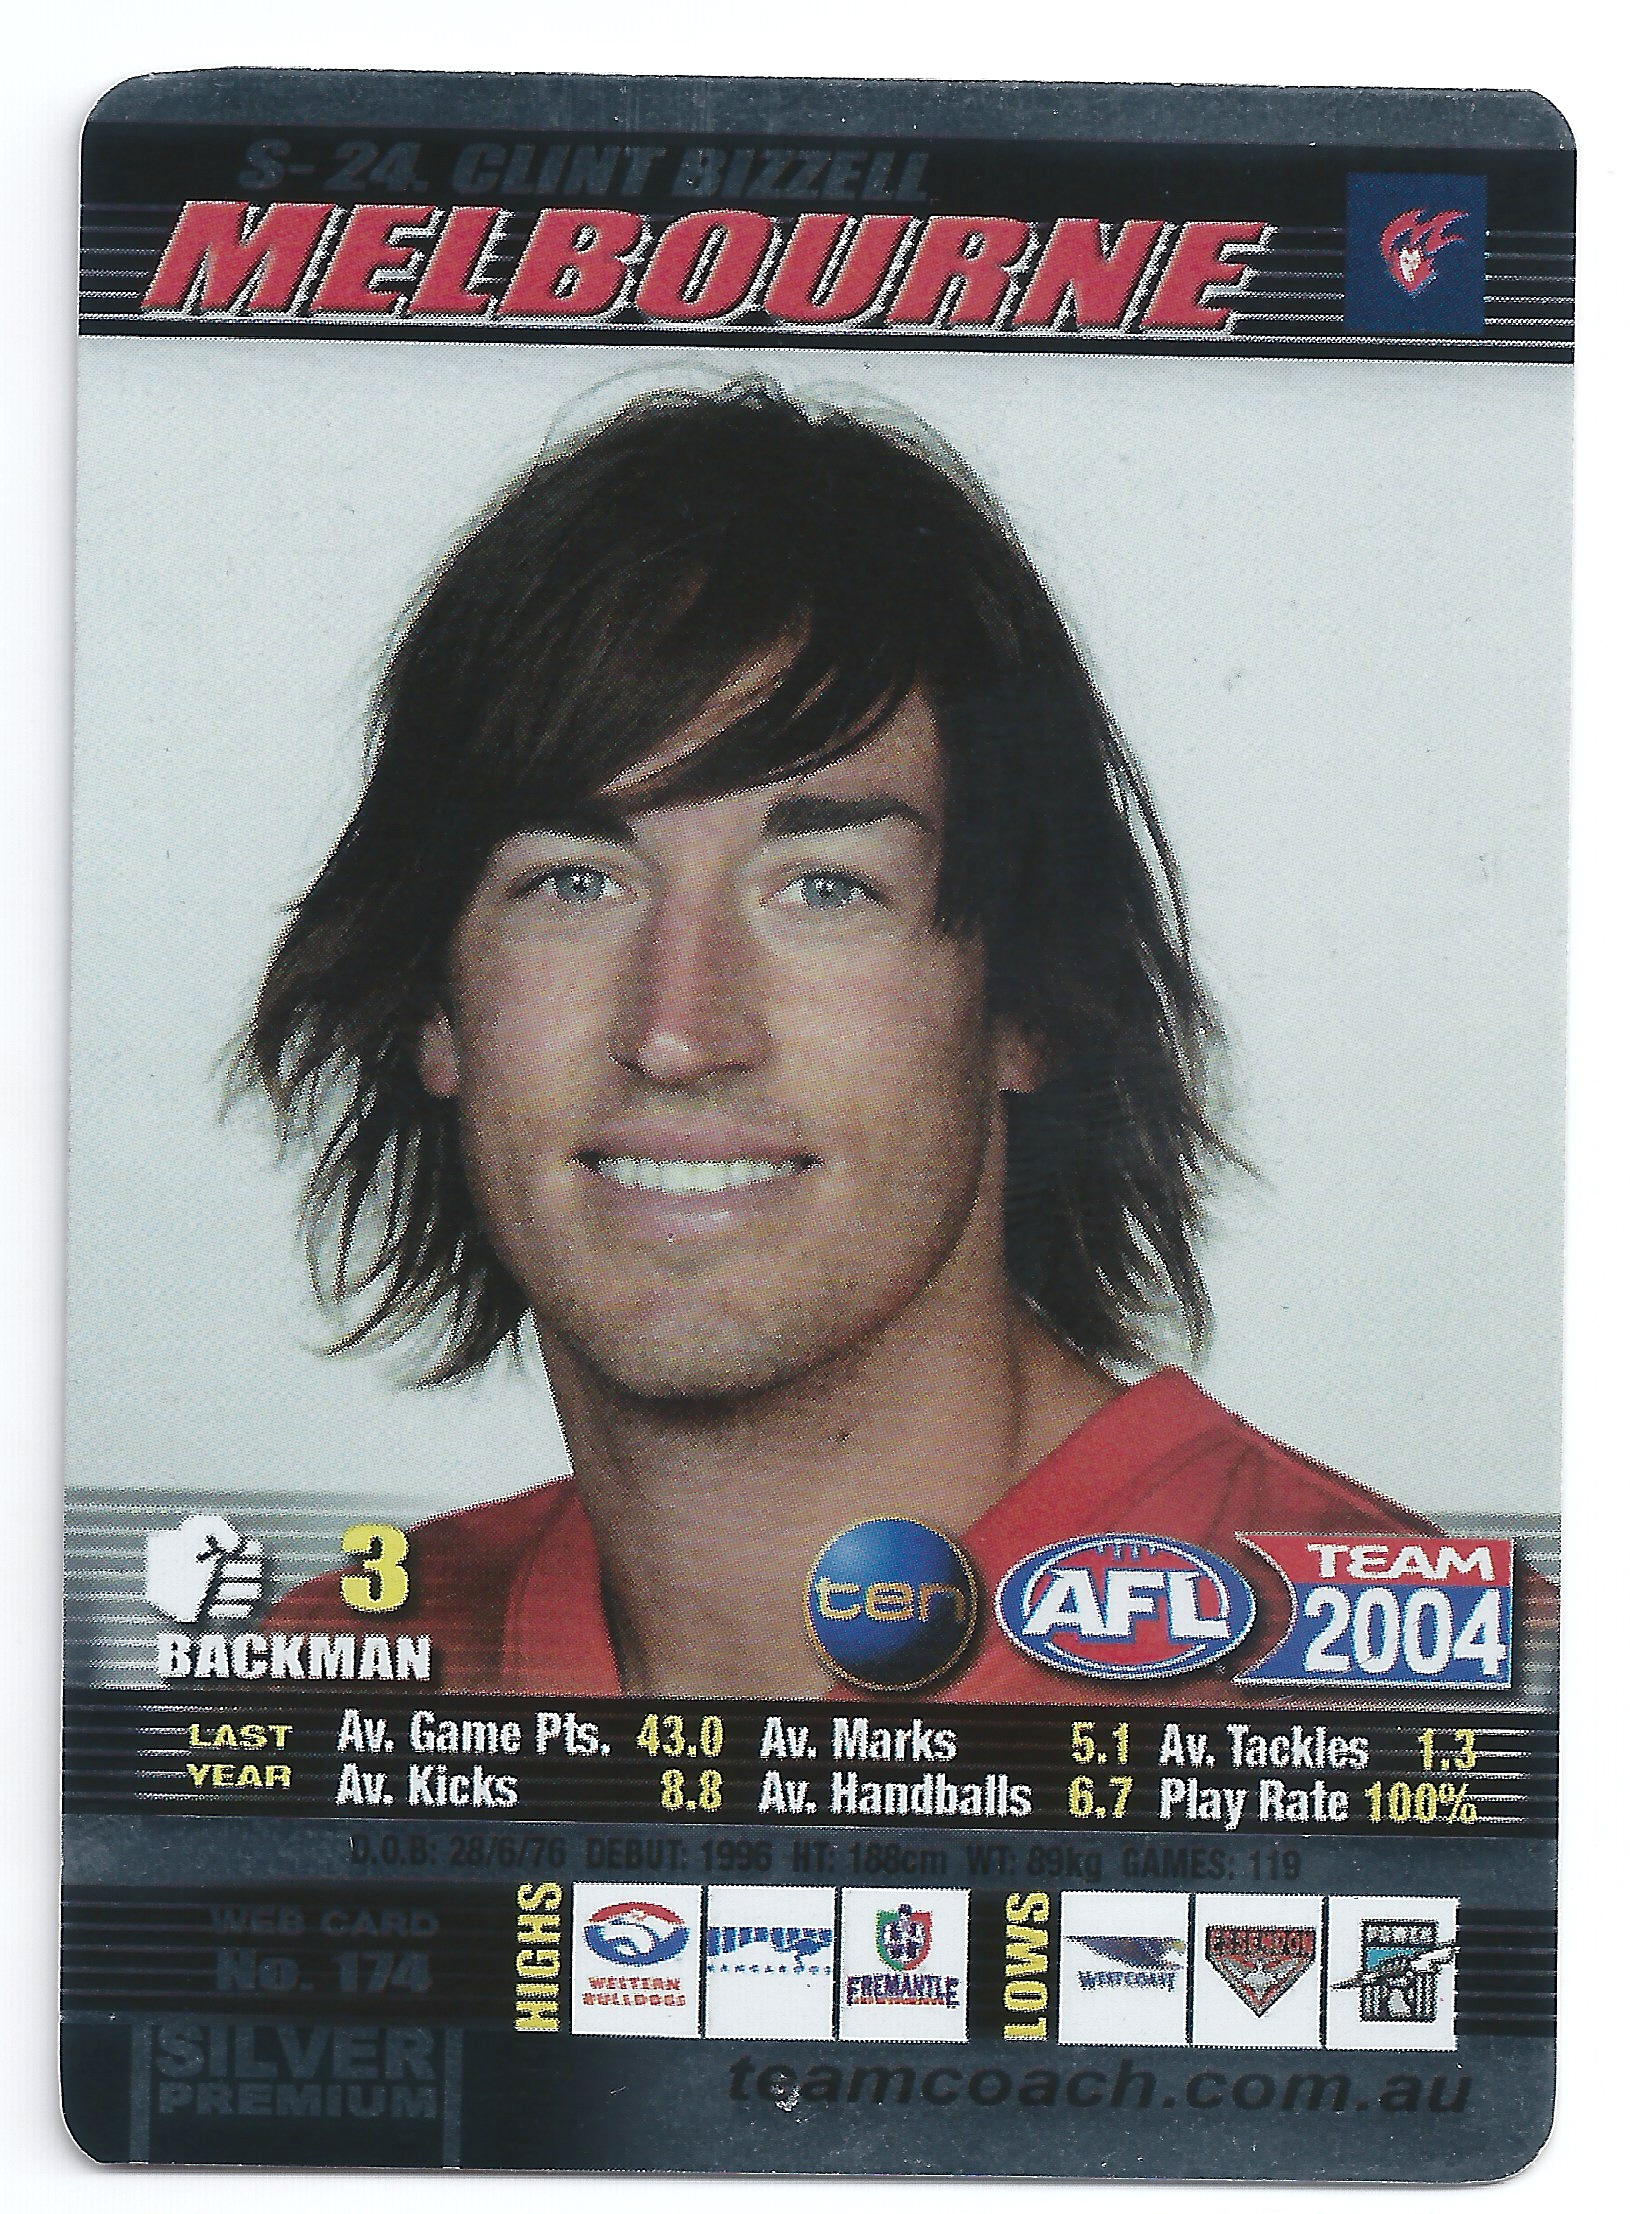 2004 Teamcoach Silver (S-24) Clint Bizzell Melbourne